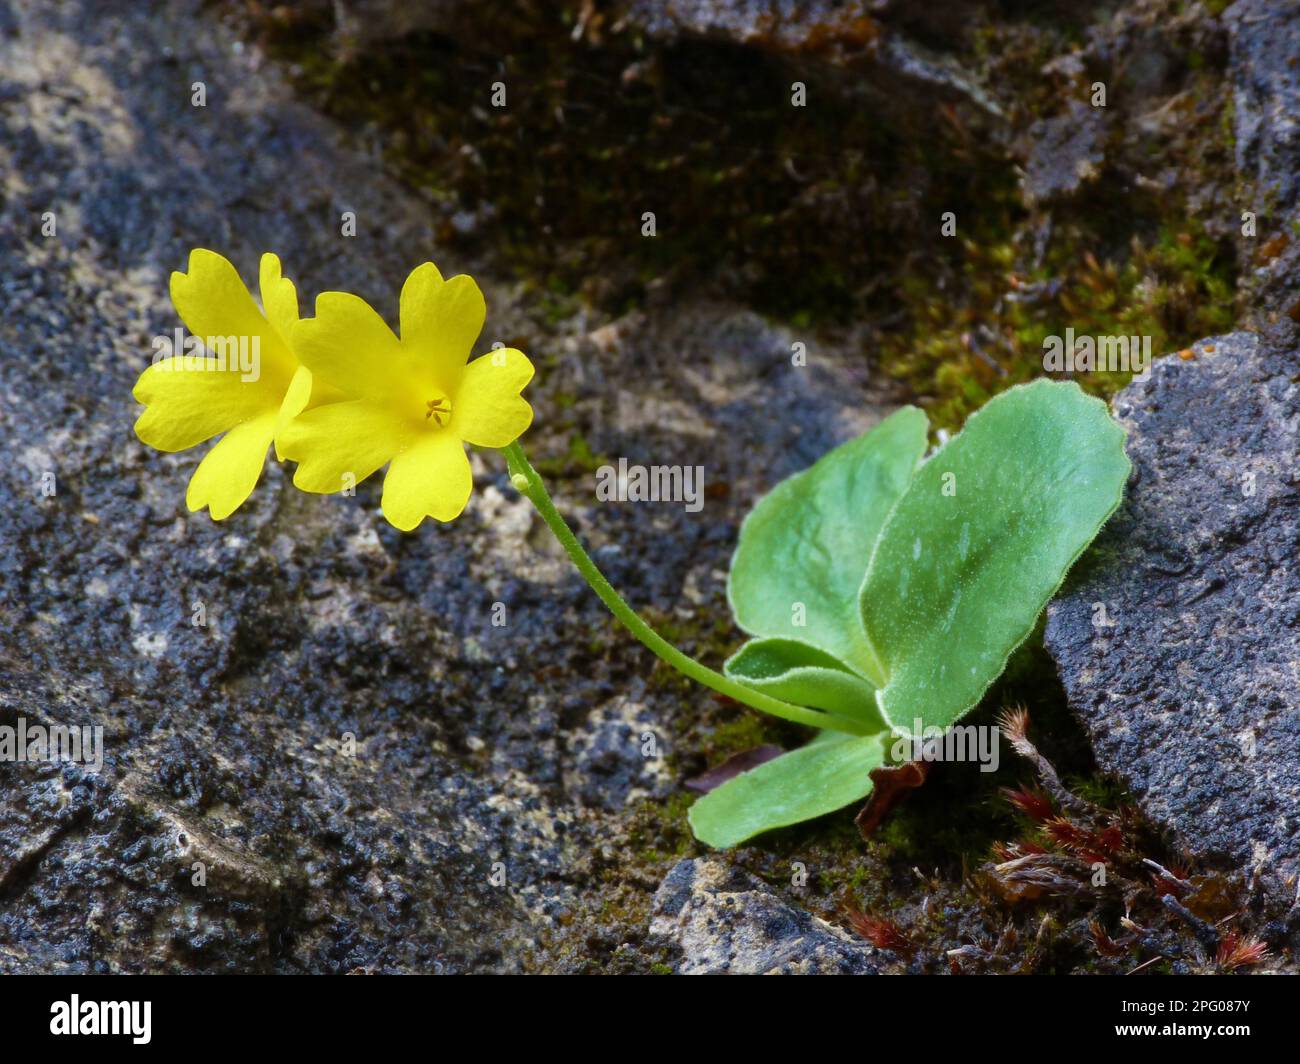 Auricula (Primula auricula) flowers, growing in limestone crevices, Dolomites, Italian Alps, Italy Stock Photo